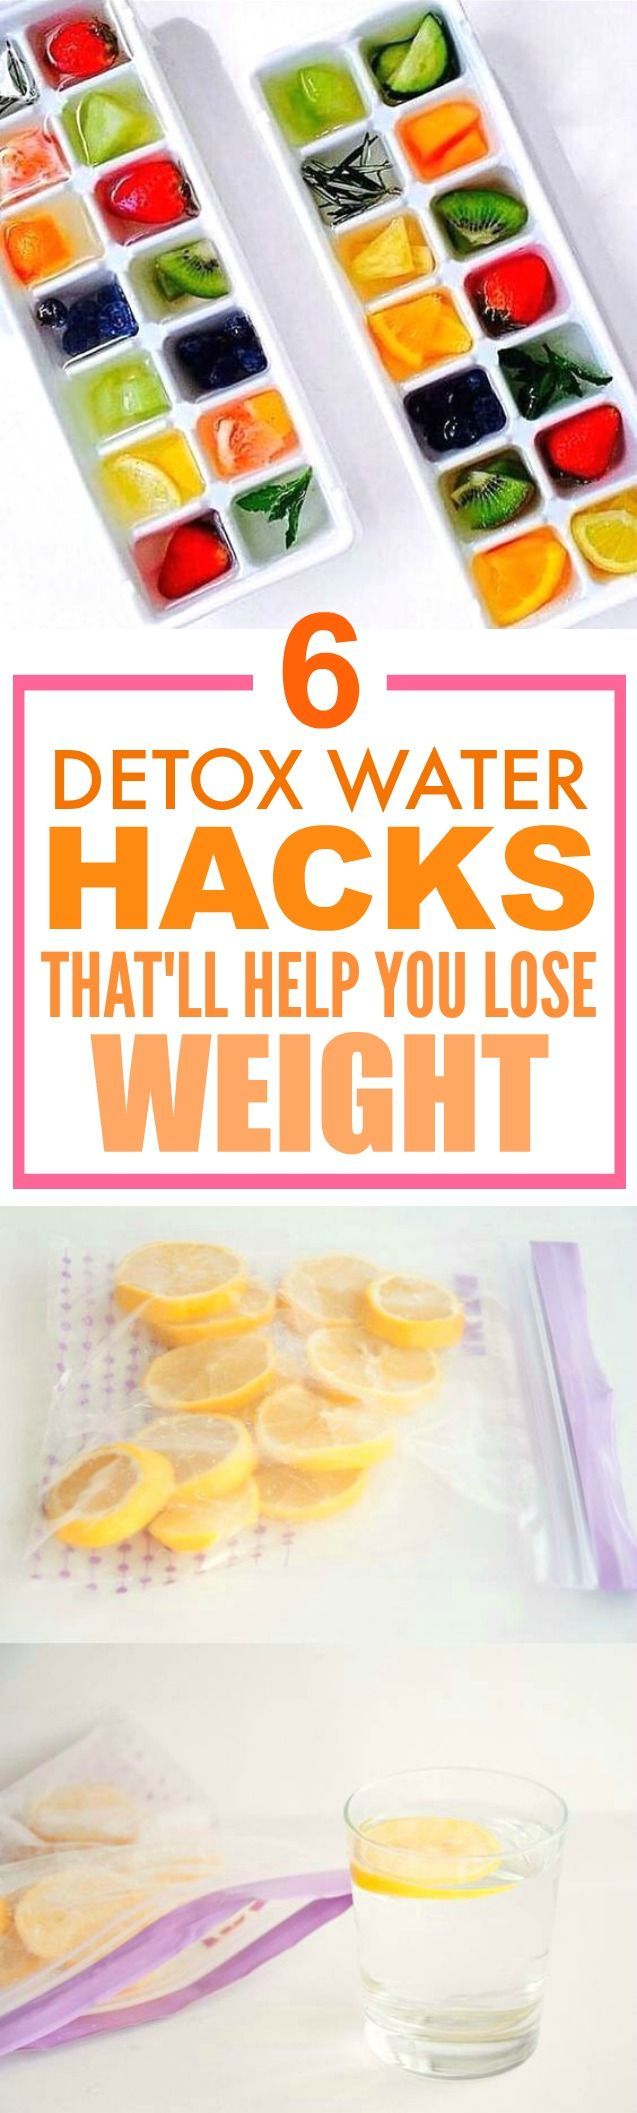 These 6 water detox hacks are THE BEST! Im so happy I found this AMAZING post! Ive tried a couple of these and Ive definitely lost